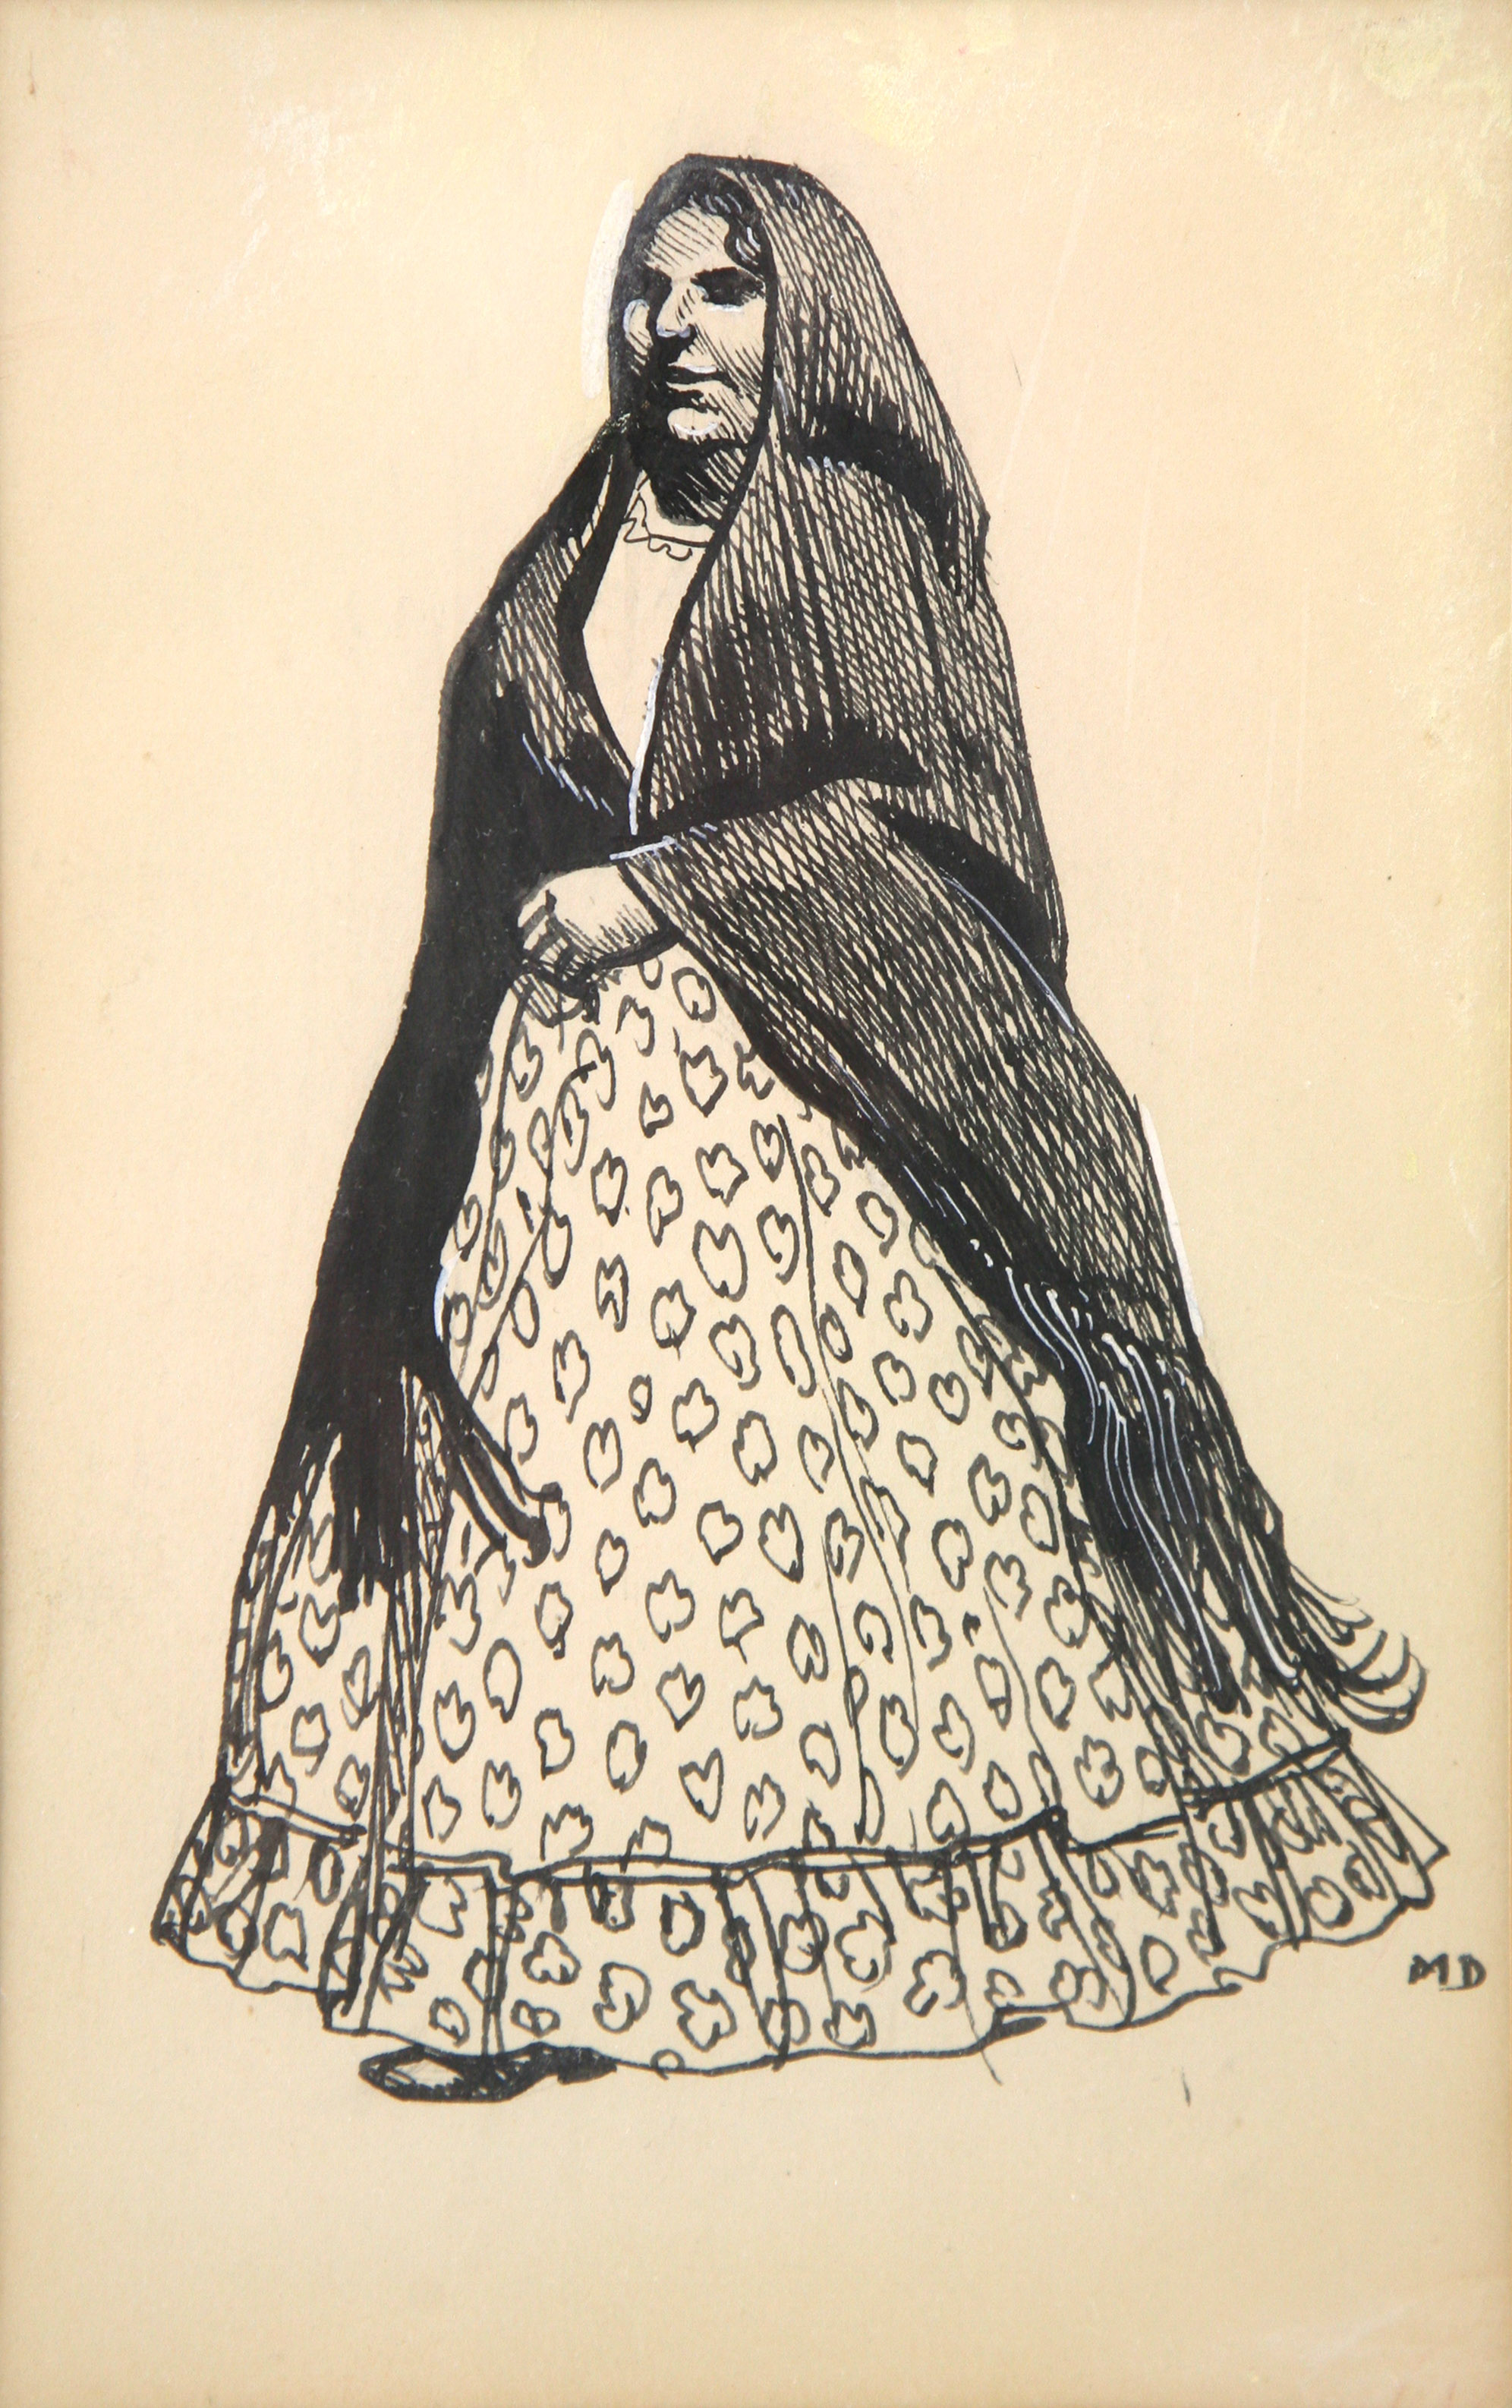 Sketch - Tucson: c. 1860-1880 - Indian or Mex. Woman